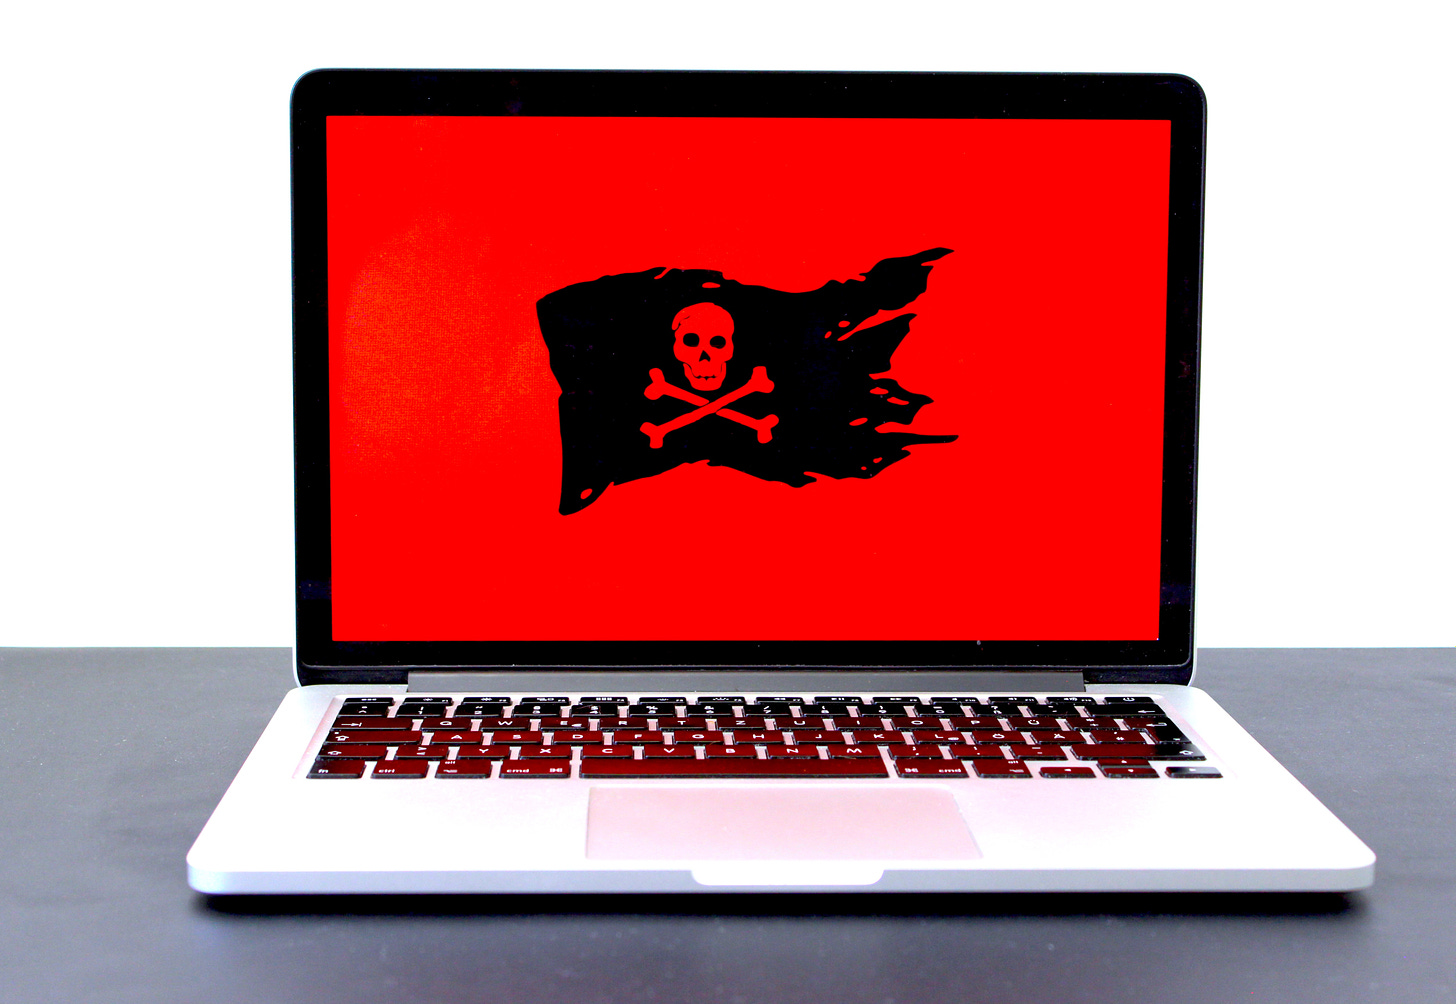 Laptop showing a red screen with a skull emoji indicating that it has been affected by ransomware